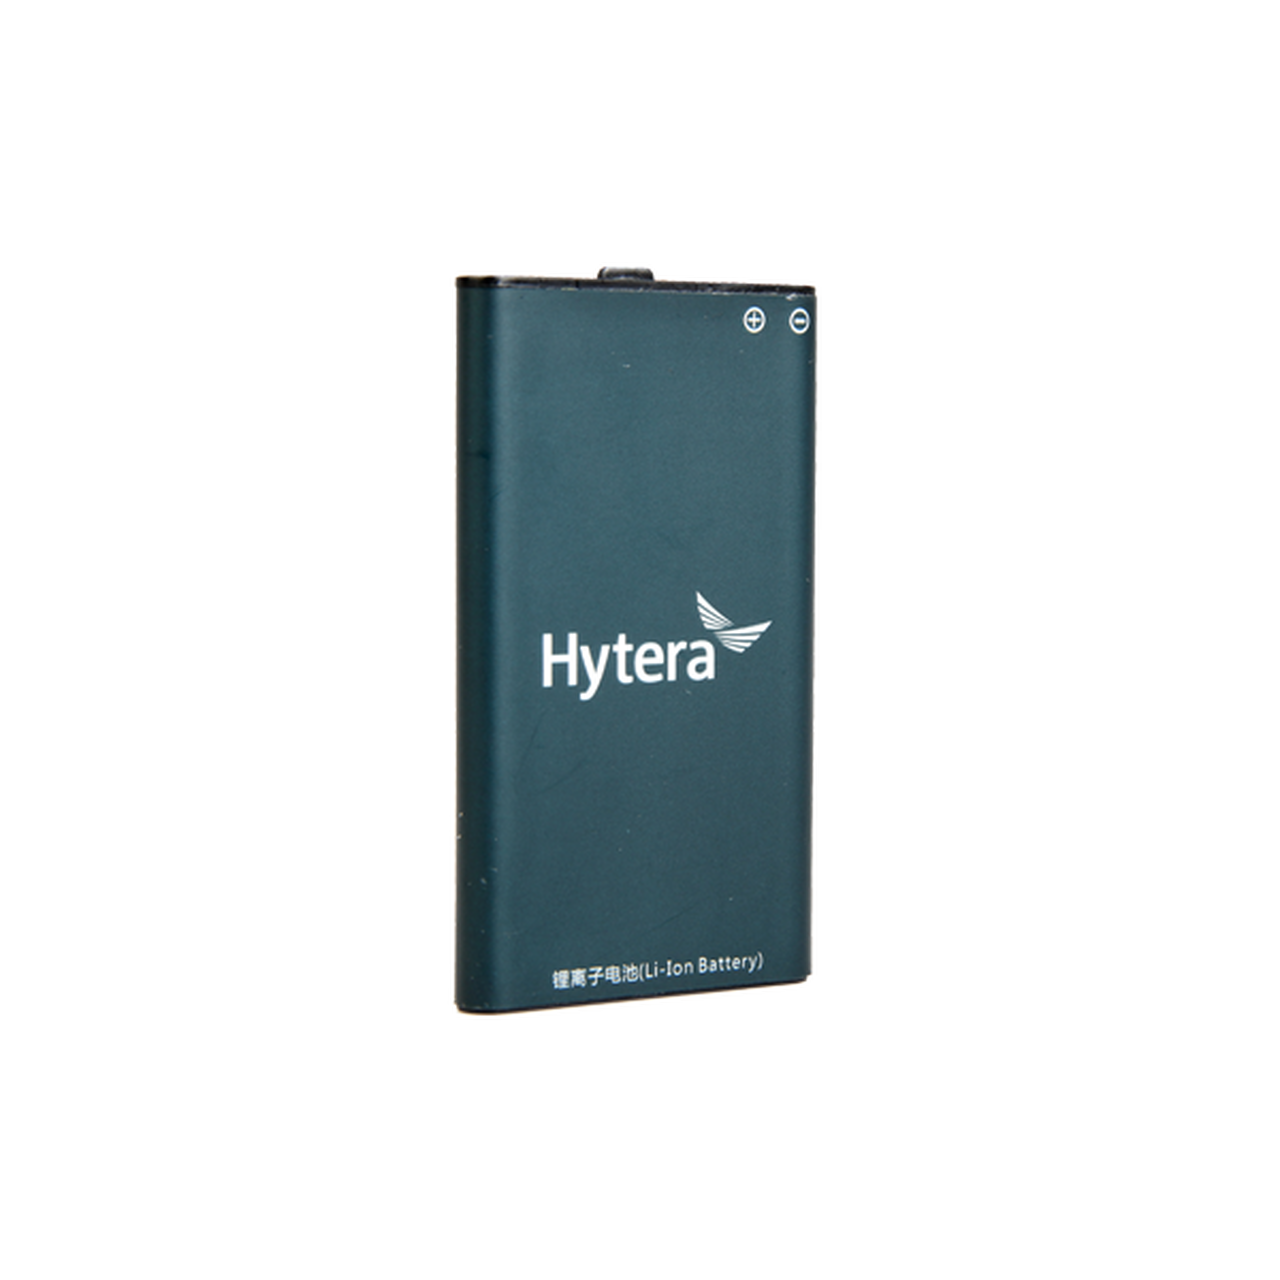 Hytera BL2009 2000 mAh Lithium Ion Battery for Hytera PD362i series two way radios